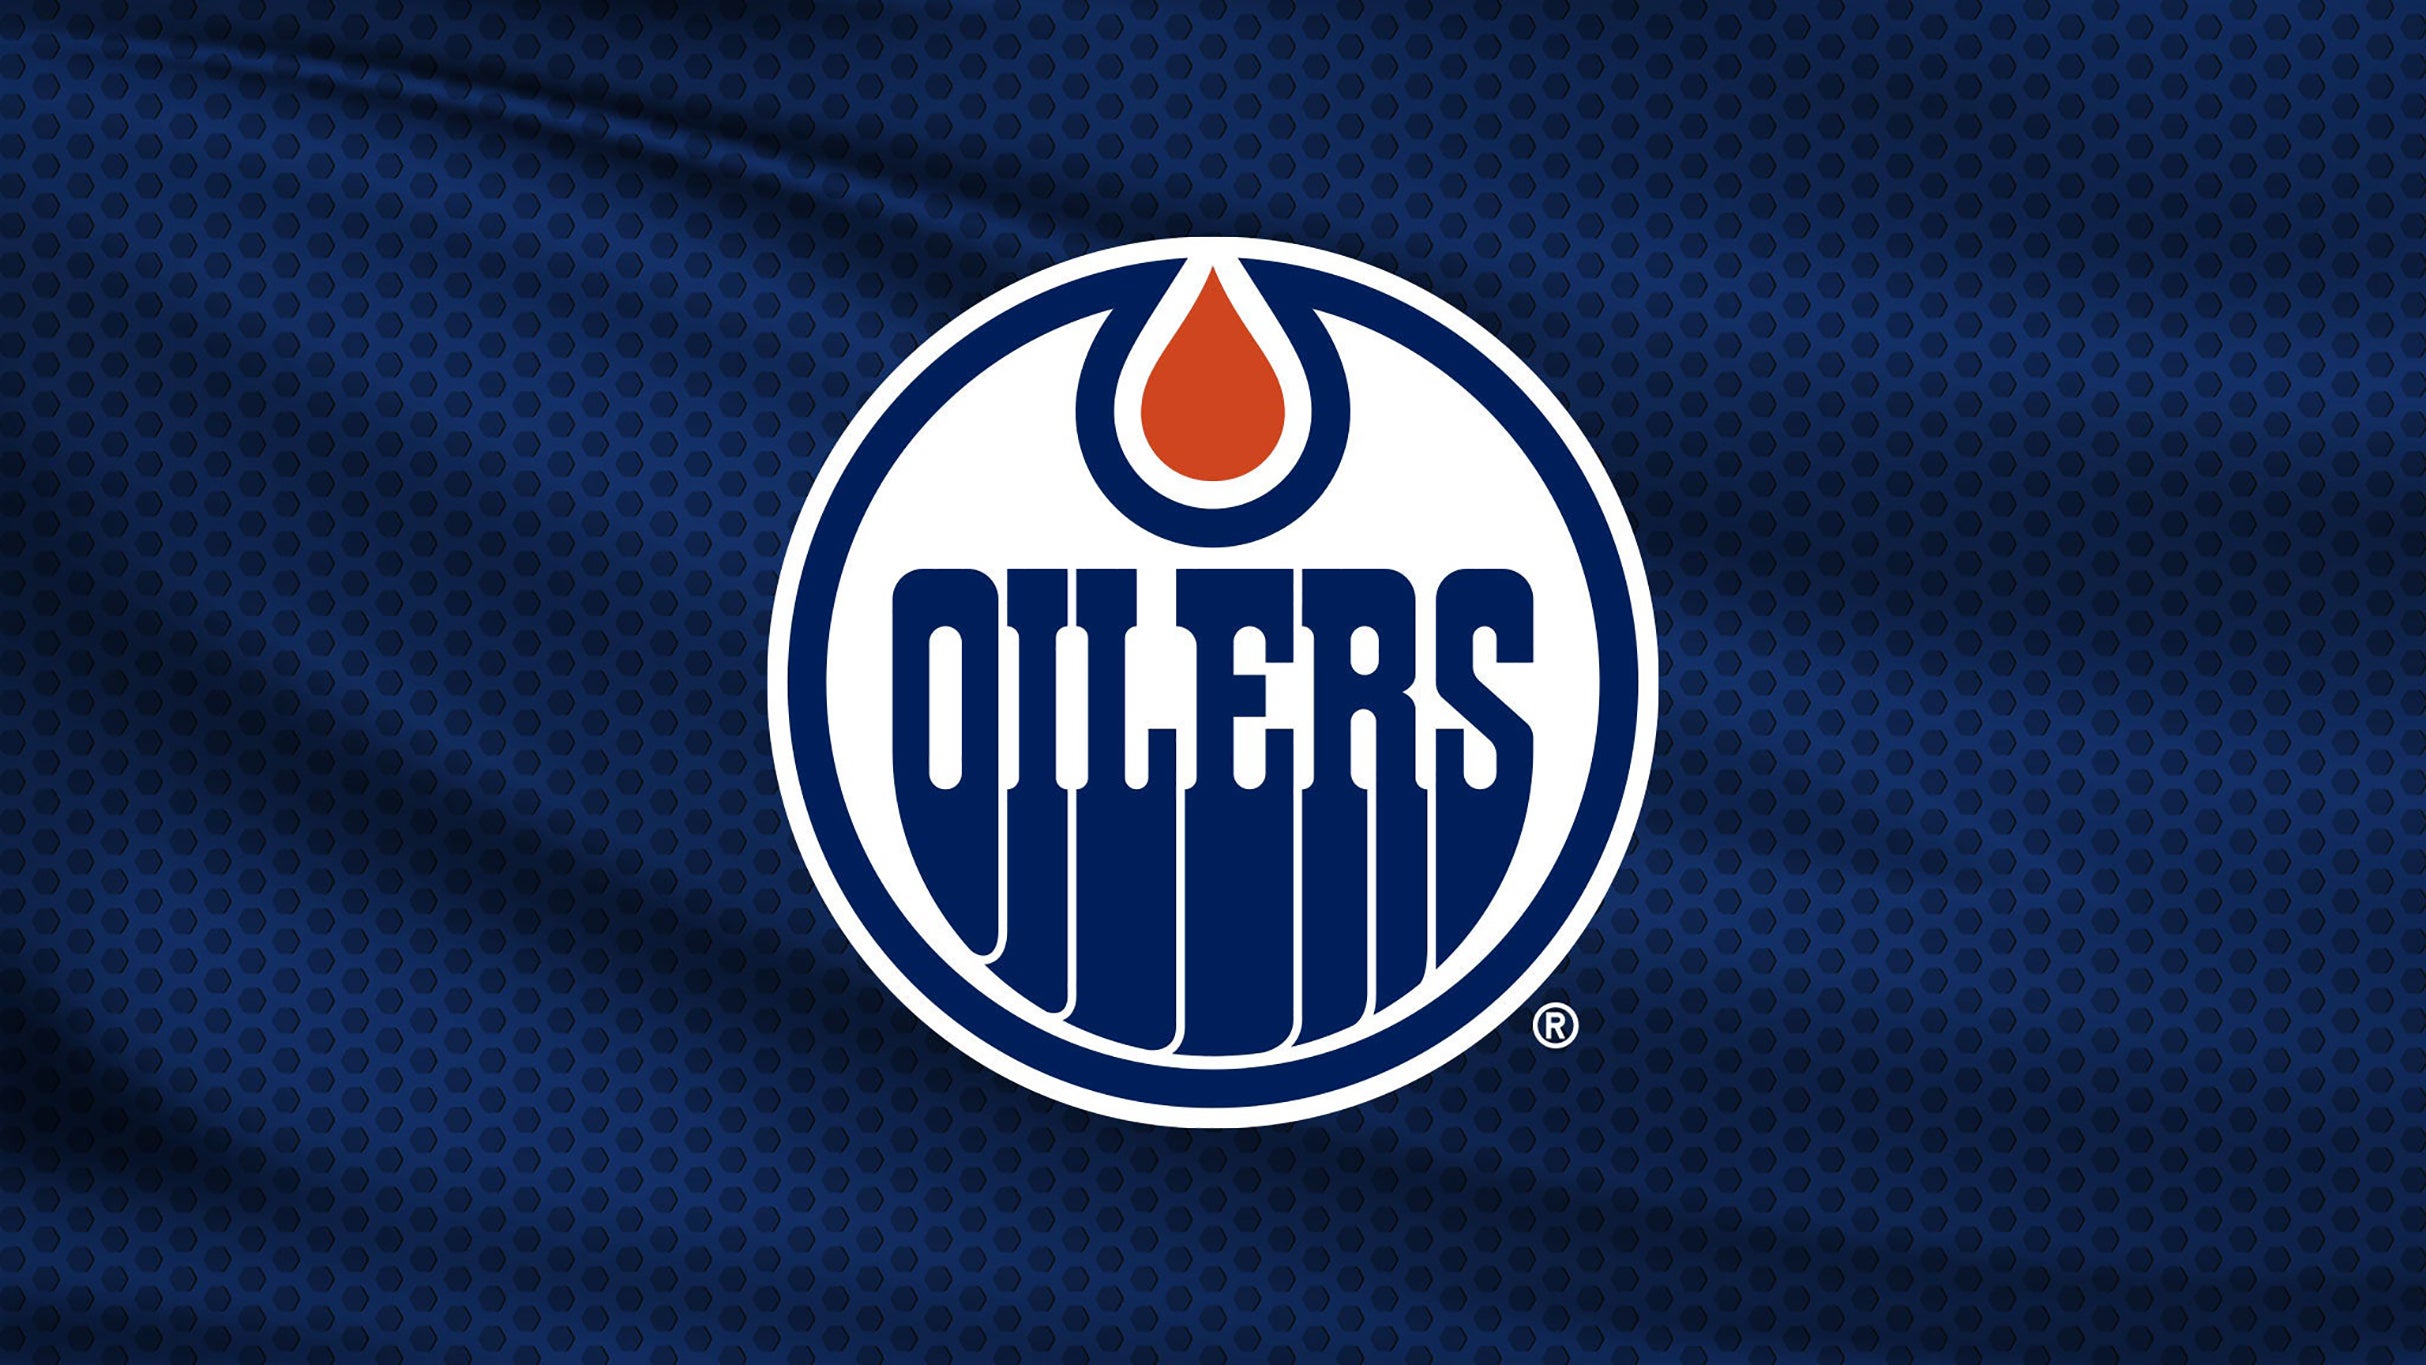 NHL Playoffs Round 2 Home Game 3: Oilers v. Canucks (in Edmonton) in Edmonton promo photo for Exclusive presale offer code